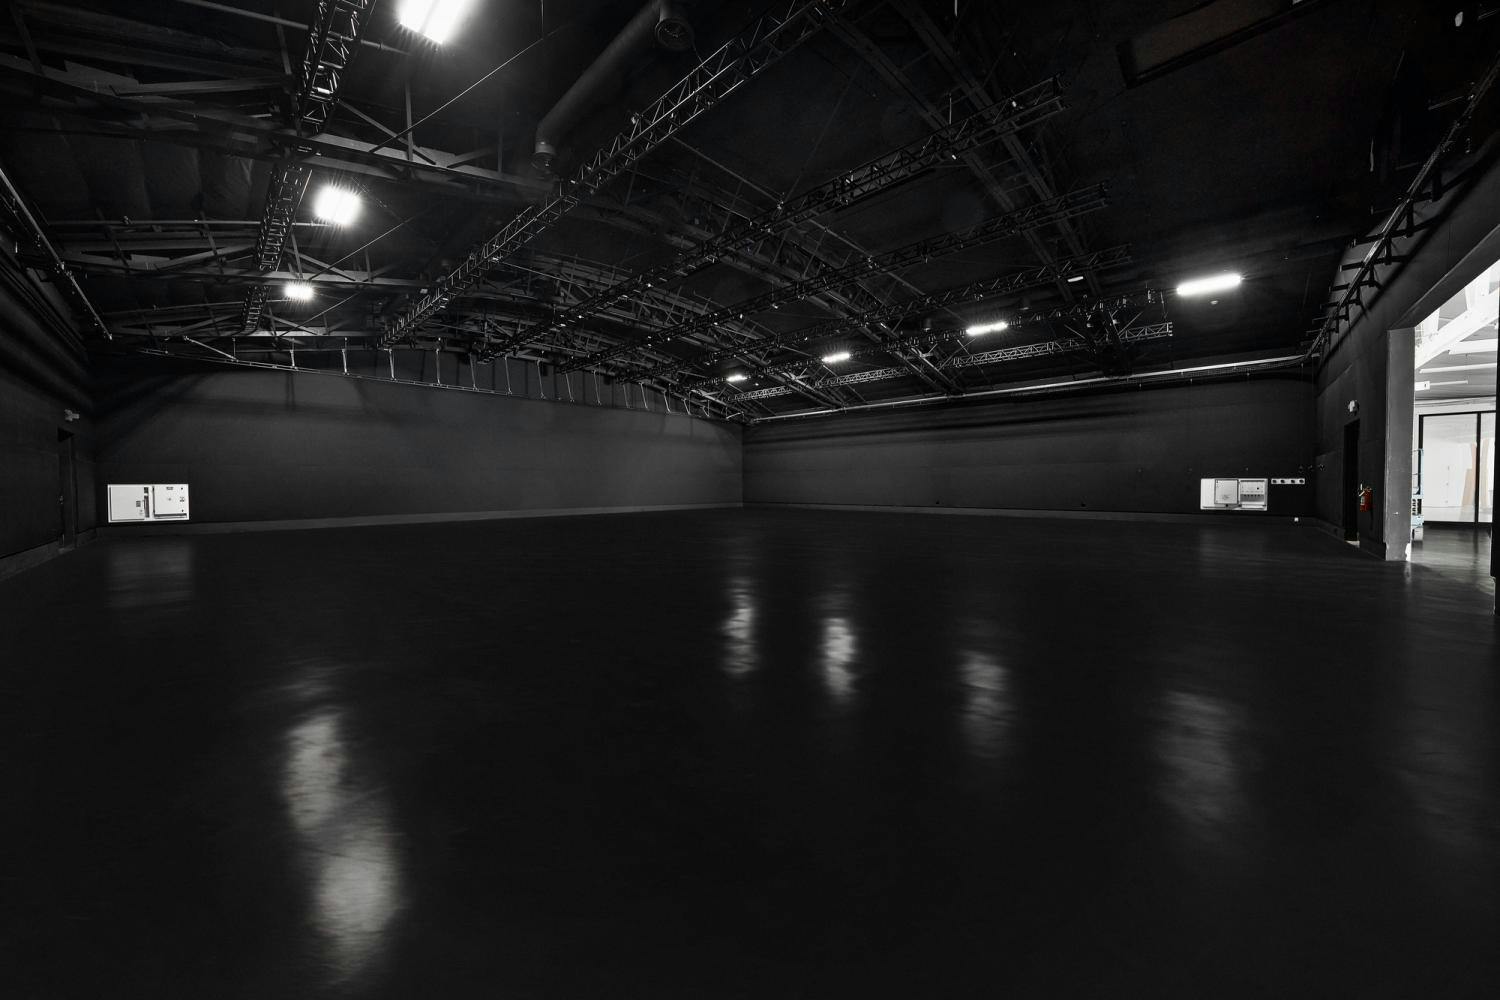 An expansive black-walled studio with high ceilings equipped with technical stage lighting and a reflective floor.